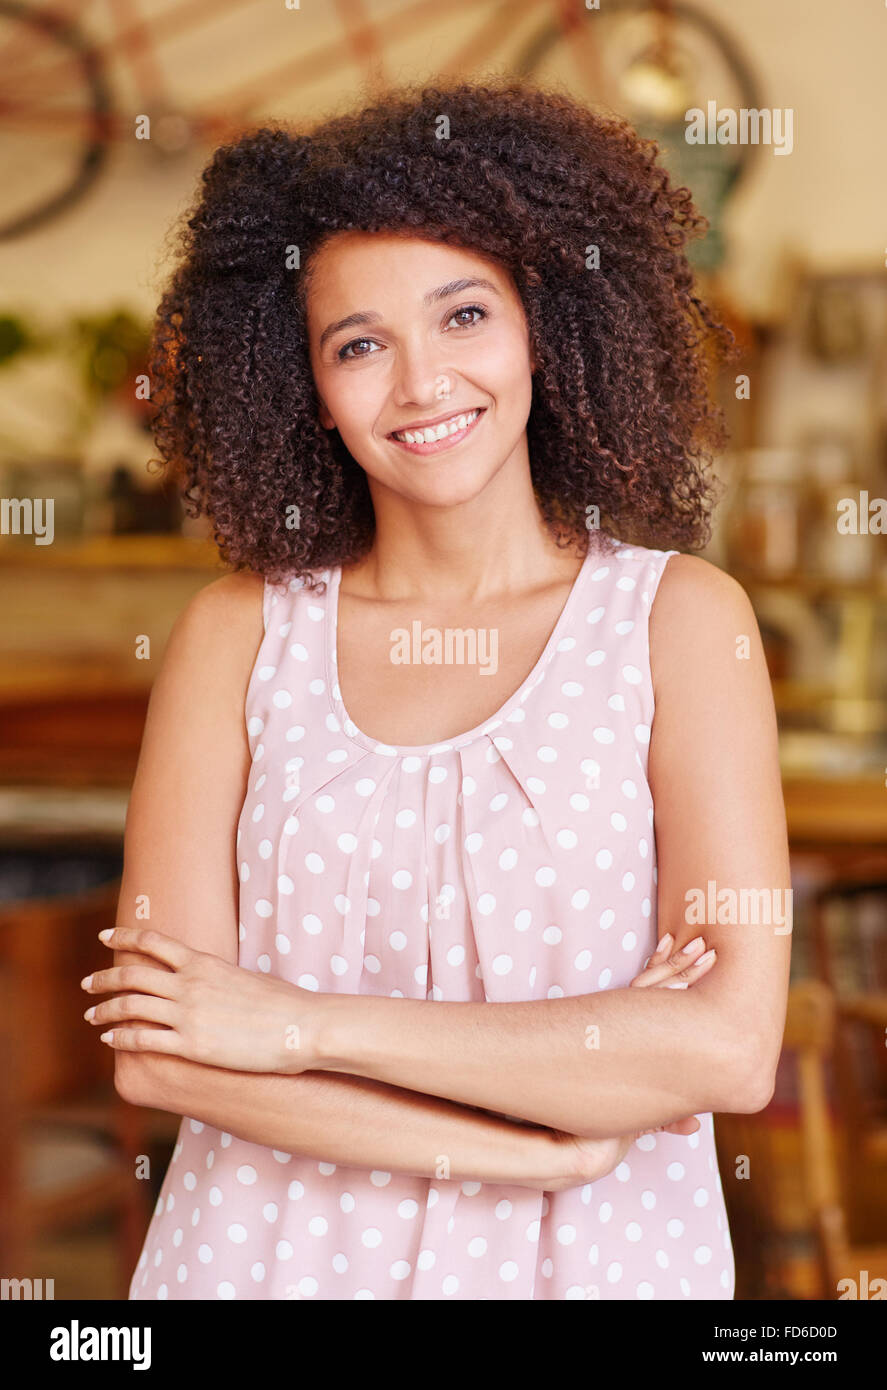 Young woman with her arms crossed smiling in a cafe Stock Photo